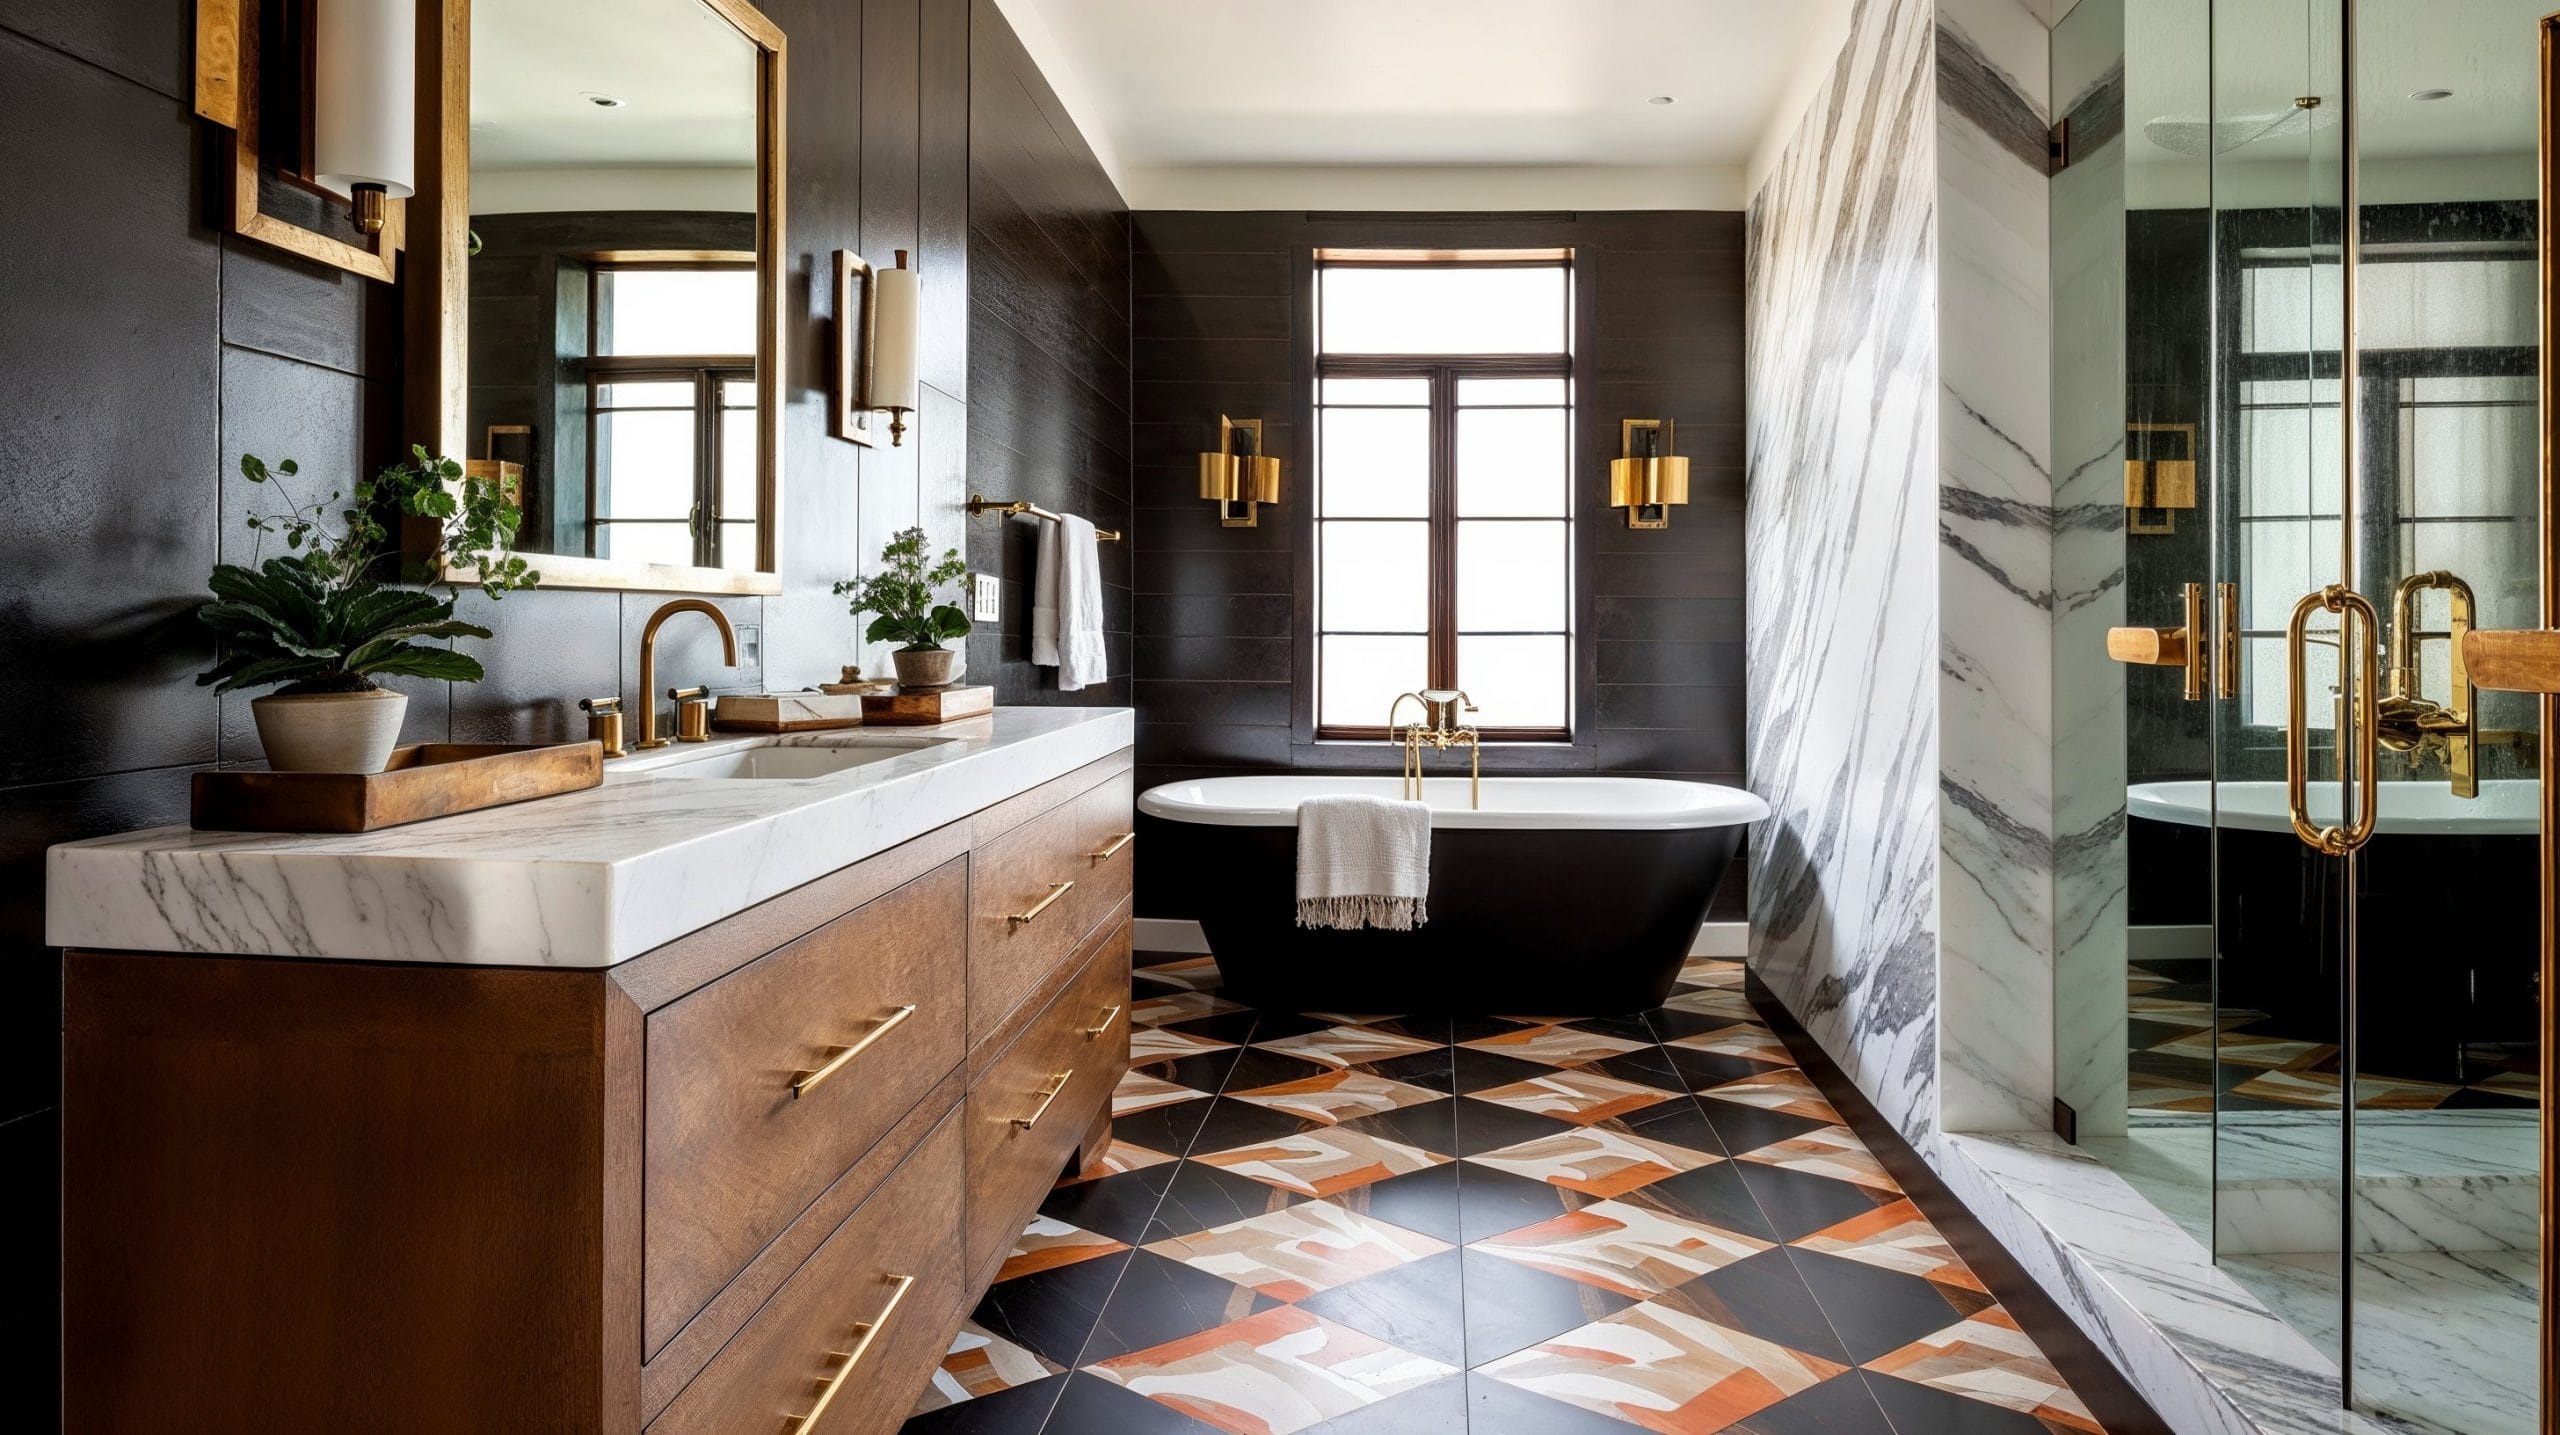 25 Wood Tile Showers For Your Bathroom